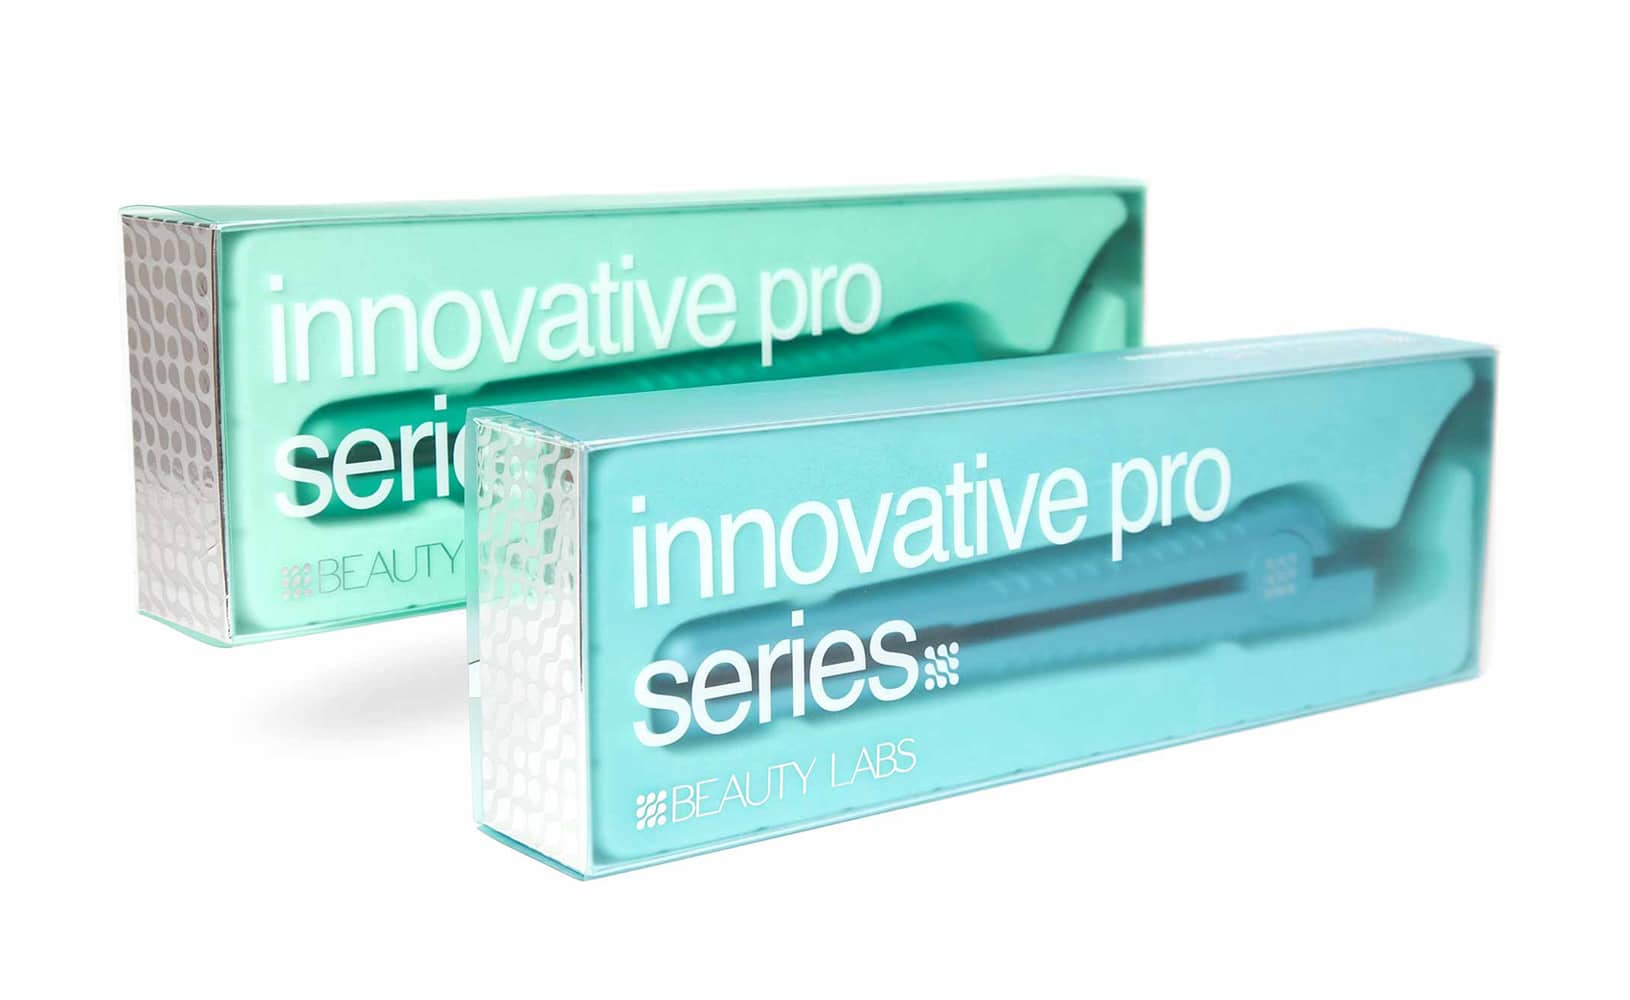 Beauty Labs minimalist packaging design including two flat irons in aqua blue and green against white backdrop.